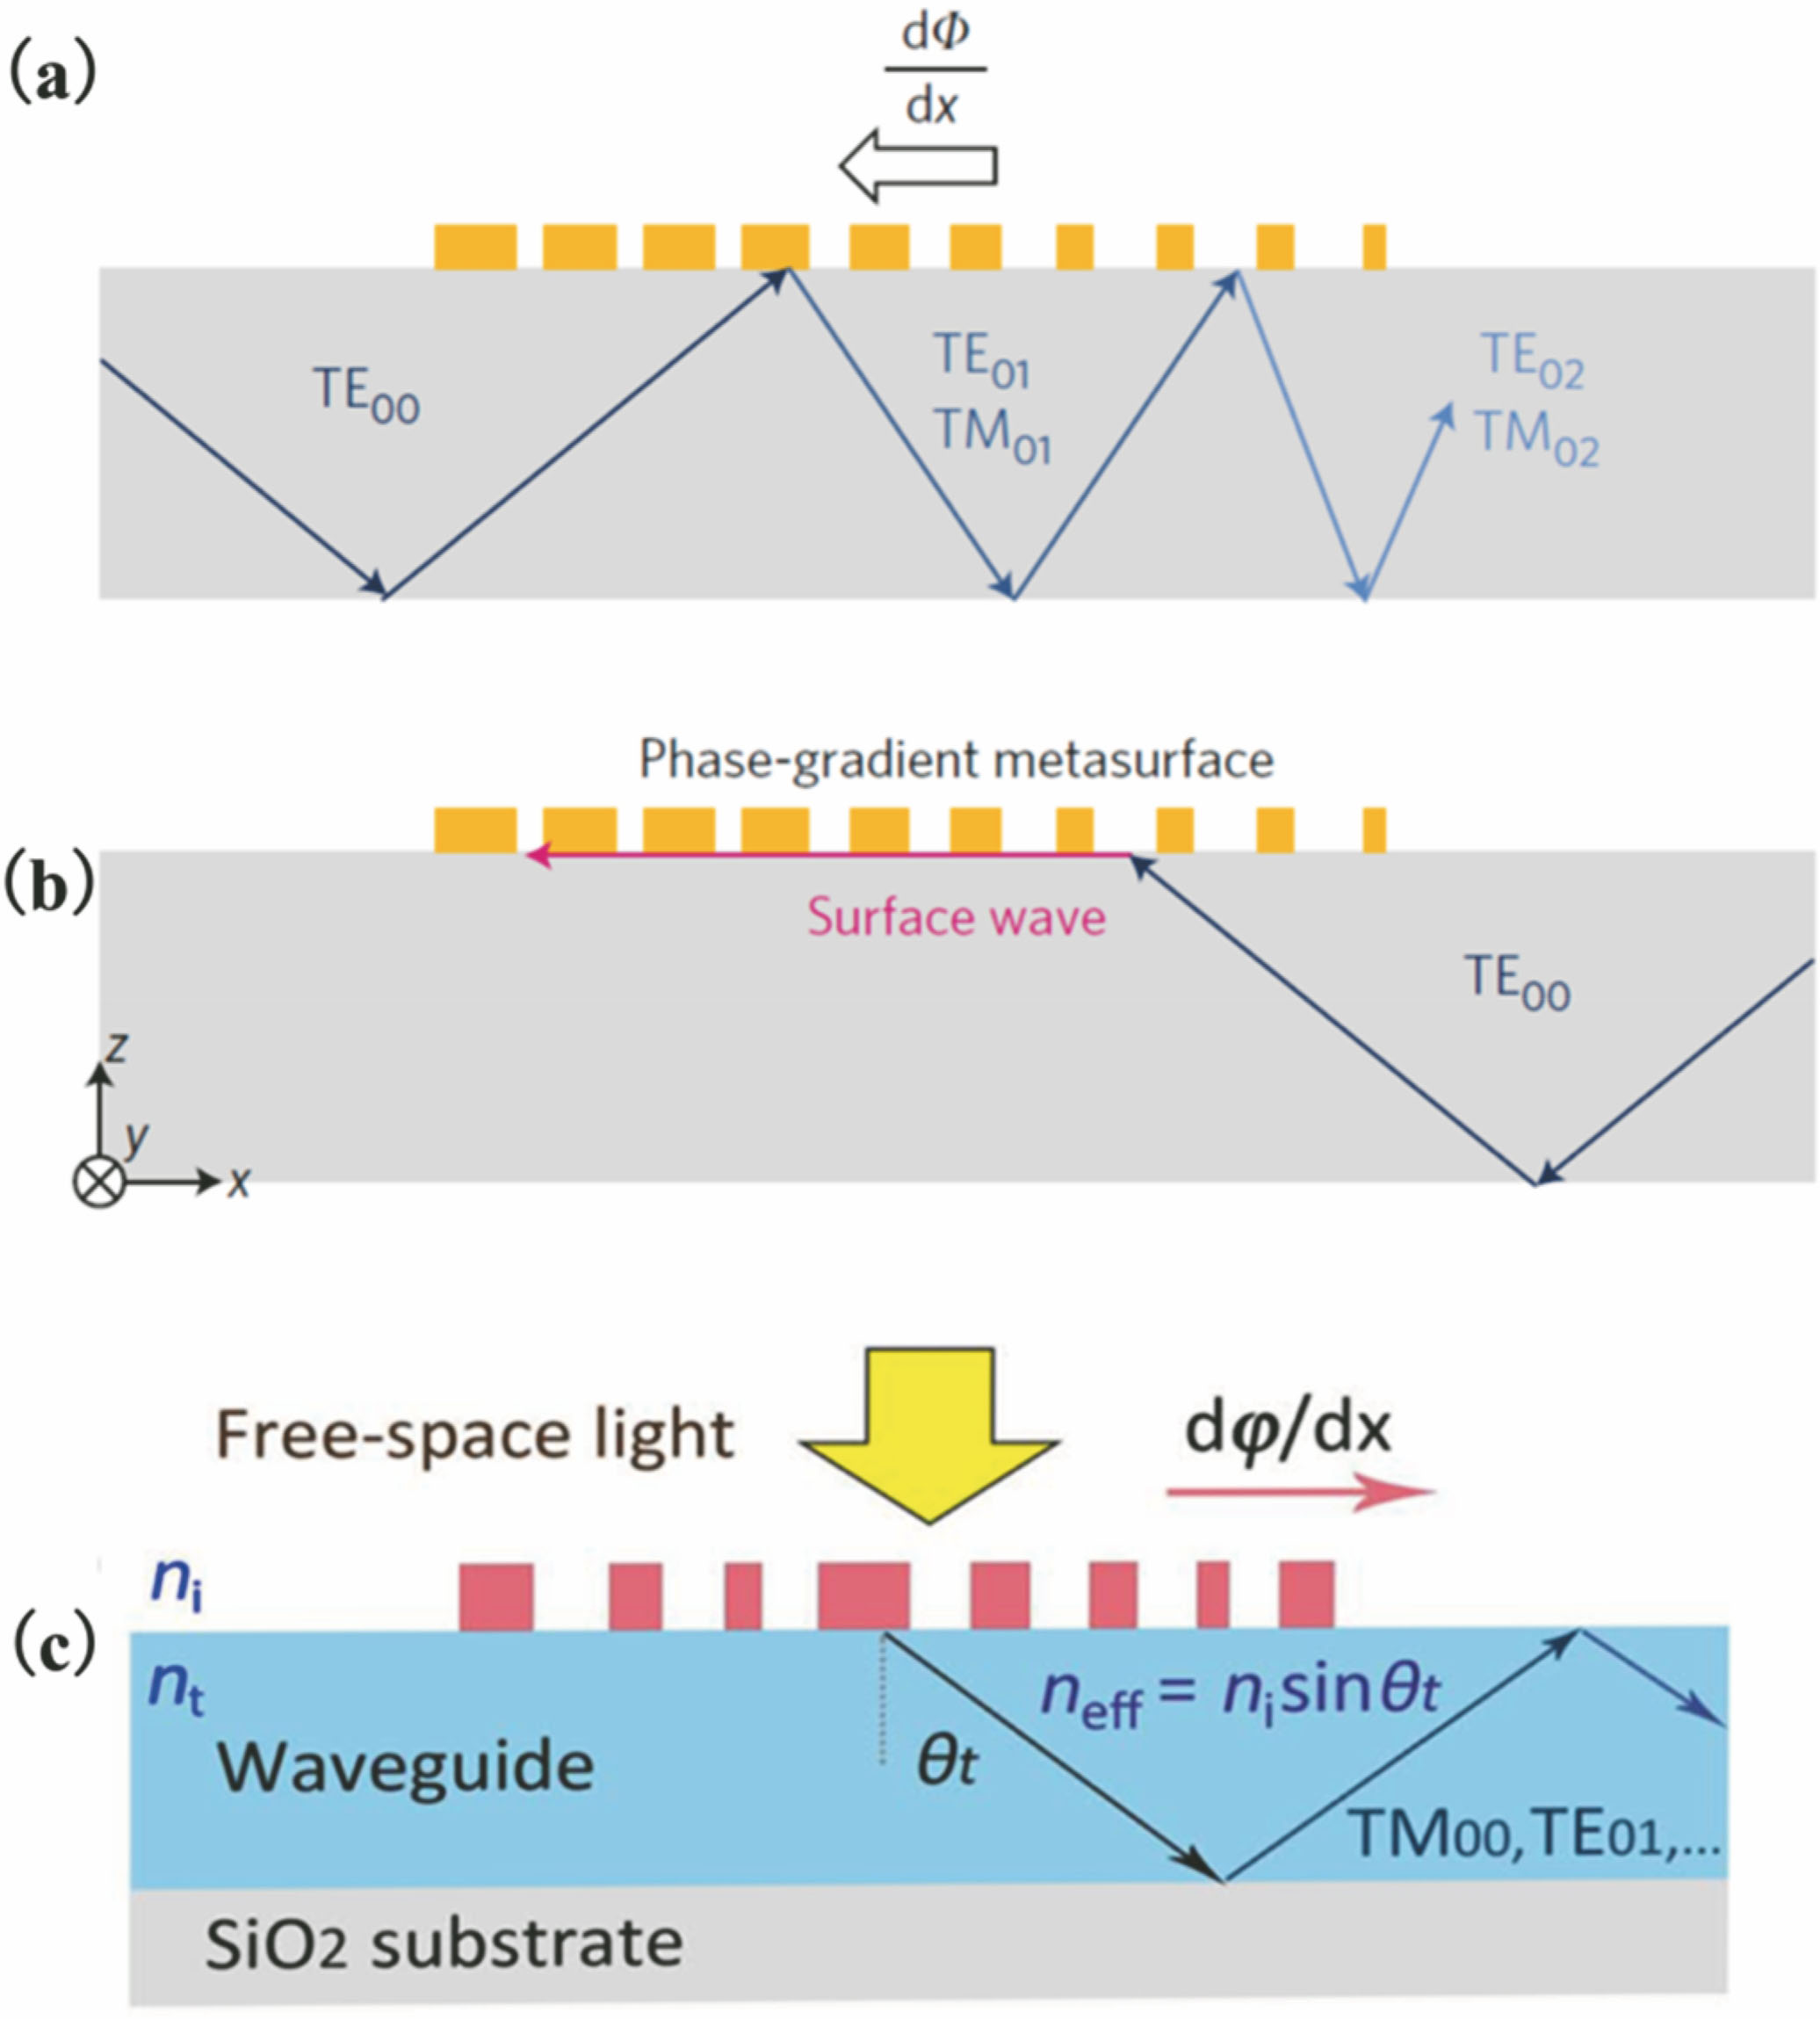 Schematic diagrams of phase gradient control and phase matching. (a) Direction of light propagation is opposite to that of phase gradient[36]; (b) direction of light propagation is the same as that of phase gradient[36]; (c) coupling free light field into waveguide propagation mode by phase matching[40]